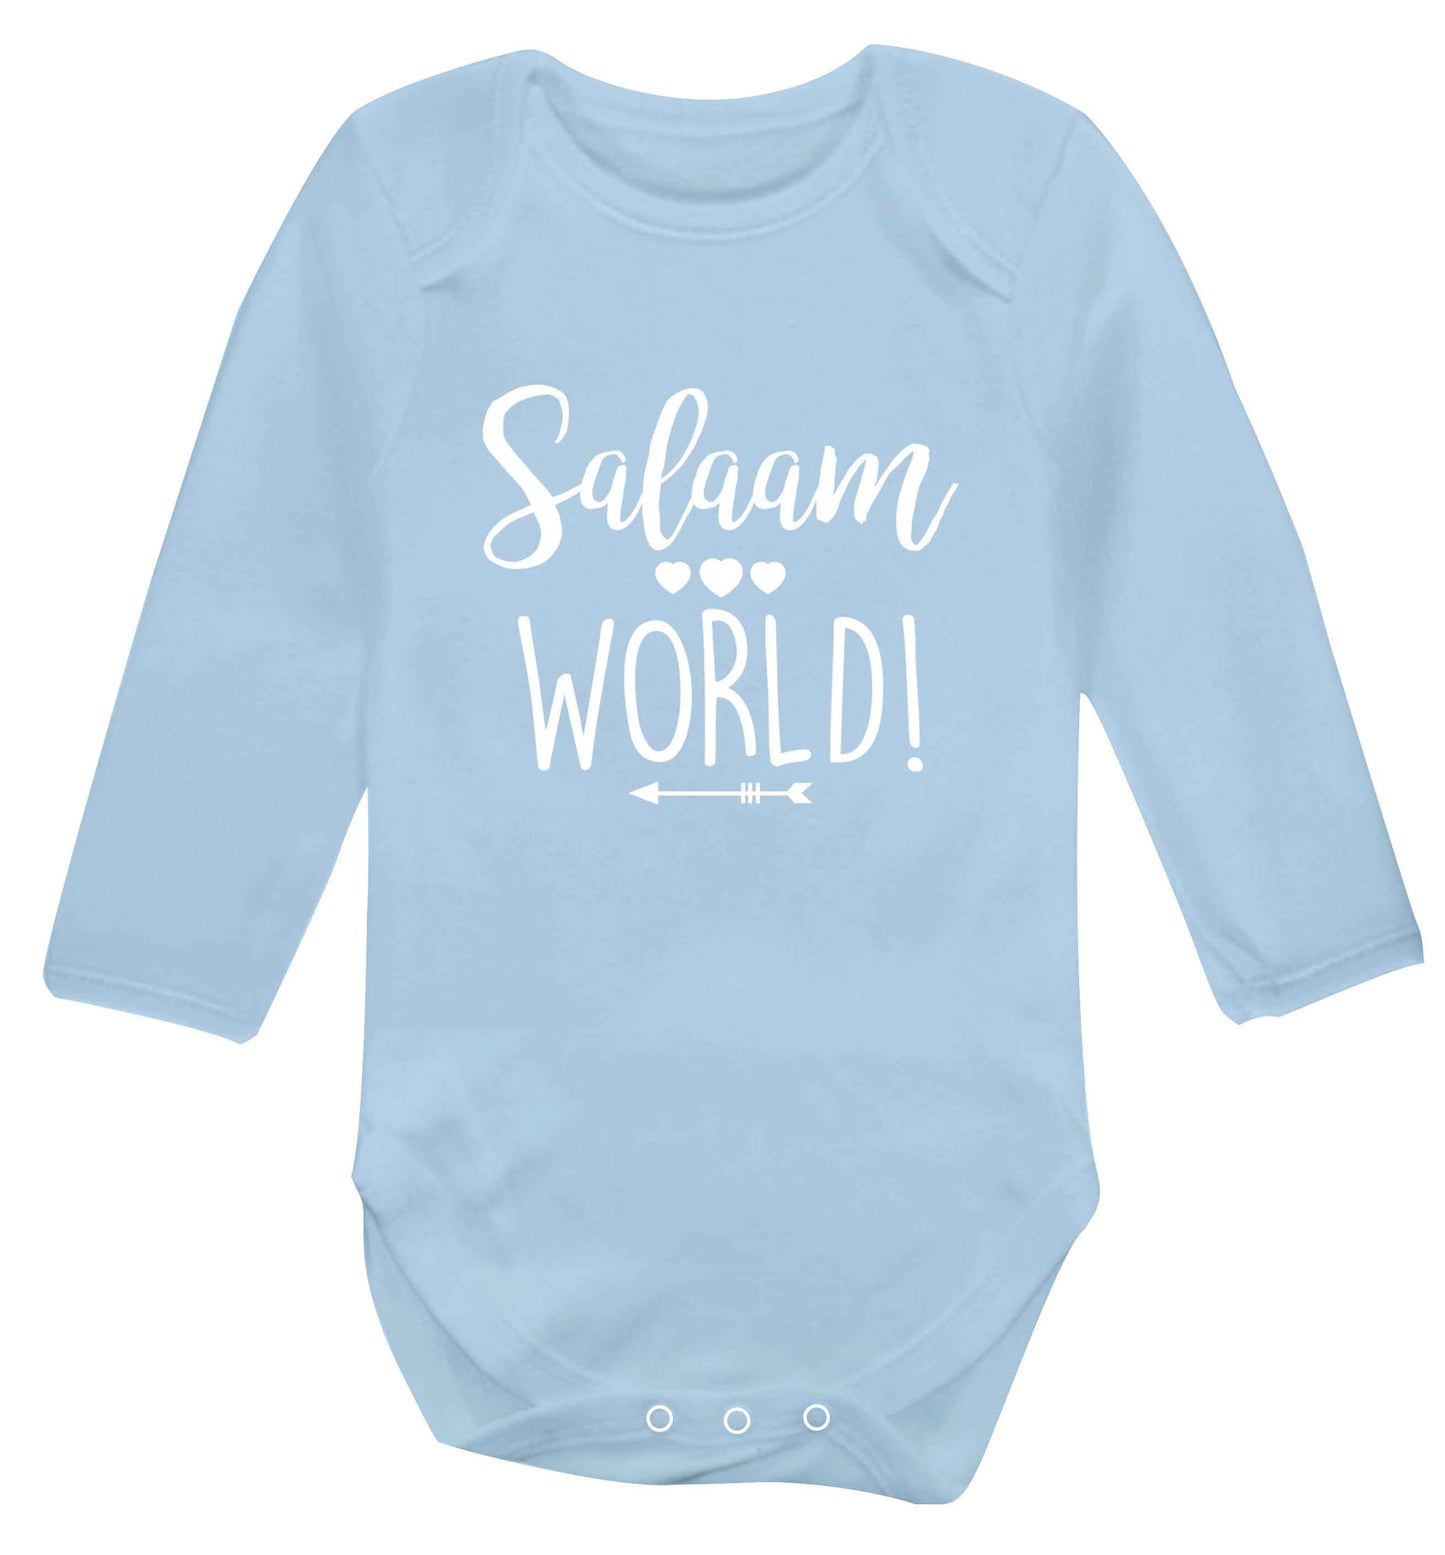 Salaam world baby vest long sleeved pale blue 6-12 months